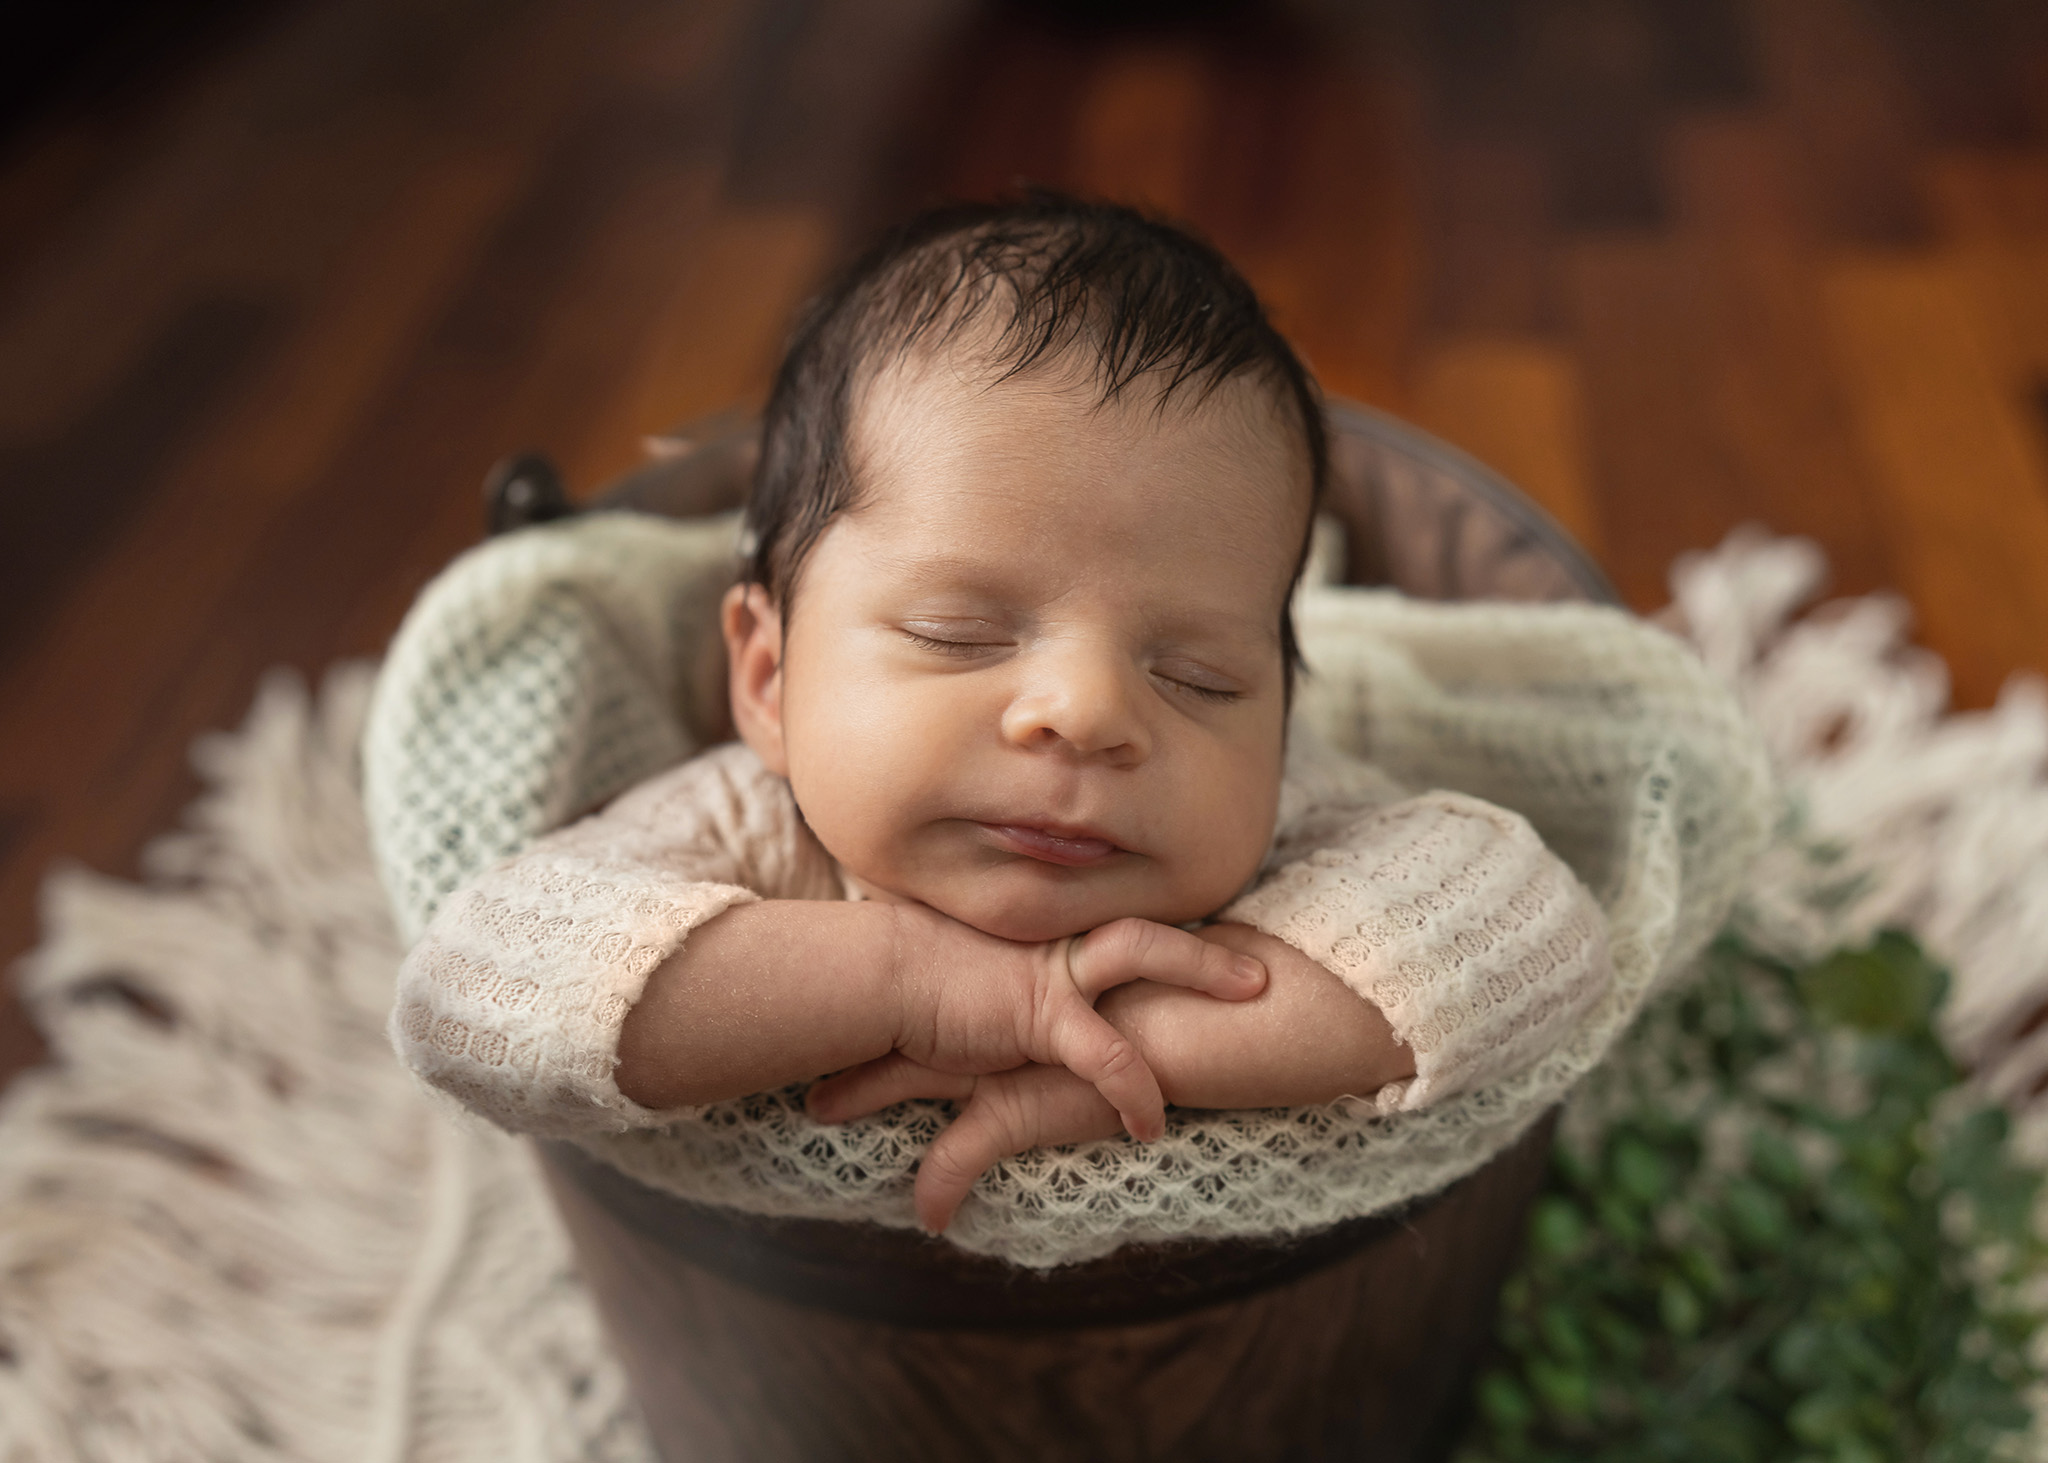 A newborn baby sleeps in a wooden bucket with head resting on hands